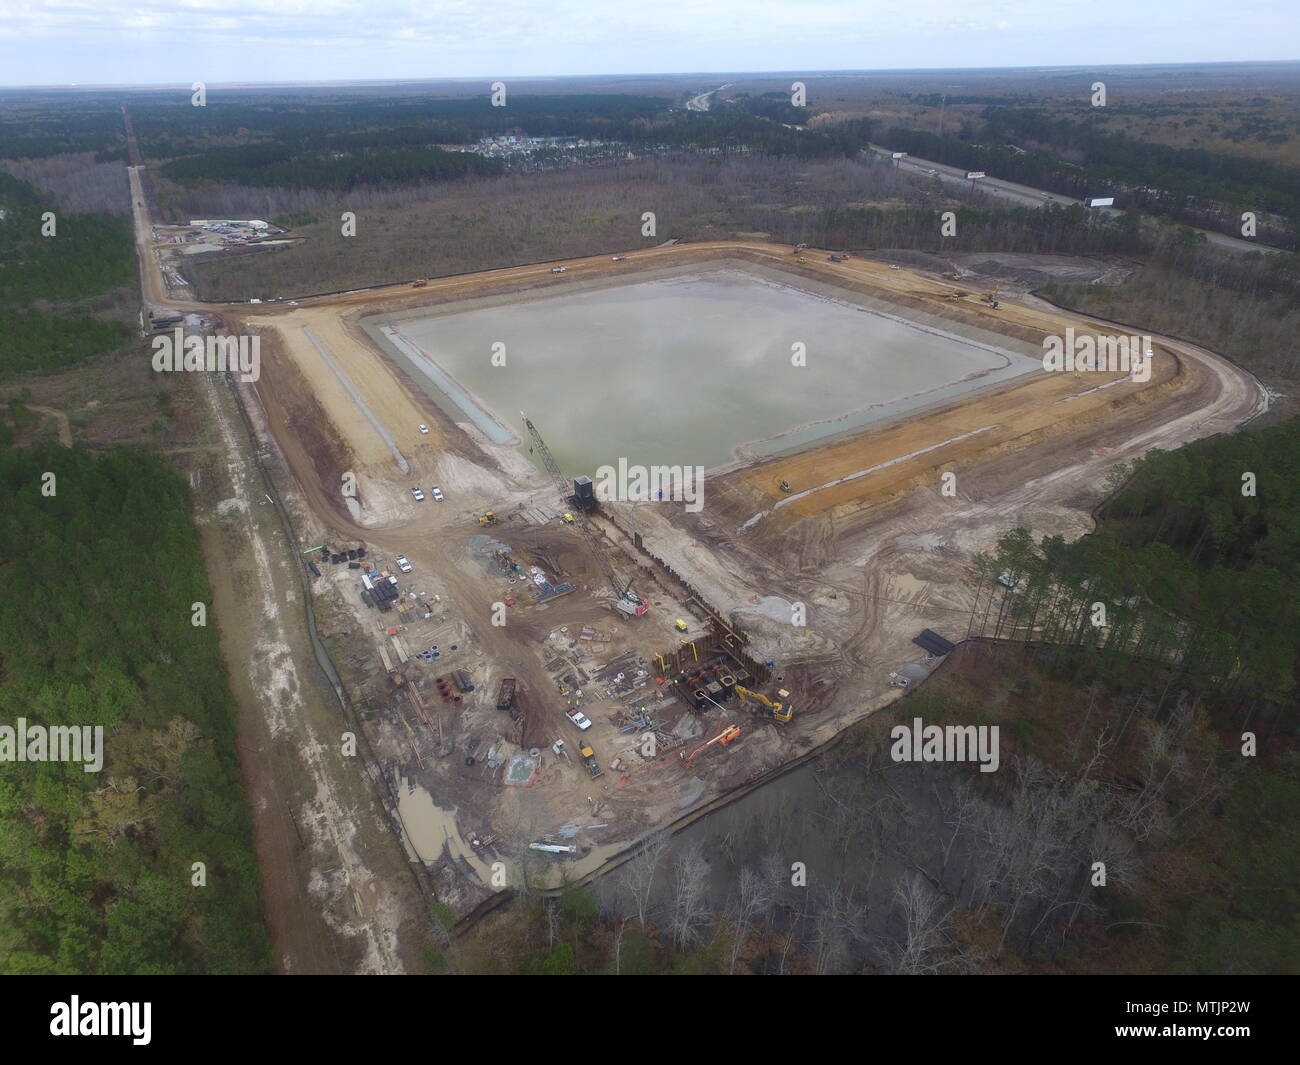 The picture displays construction progress on the Raw Water Storage Impoundment, as part of the Savannah Harbor Expansion Project, which currently sits at 53 percent completion. Progress shows the impoundment berm is up to 32 inches, out of its 42 inch final elevation. It features four pump cans (pictured bottom center inside cofferdam) connected to an effluent line and a raw water intake box set to an elevation of 36 inches (black structure at Southwest corner of impoundment). Construction on the reservoir began March 2016. It will provide an additional resource of fresh water that may be nee Stock Photo